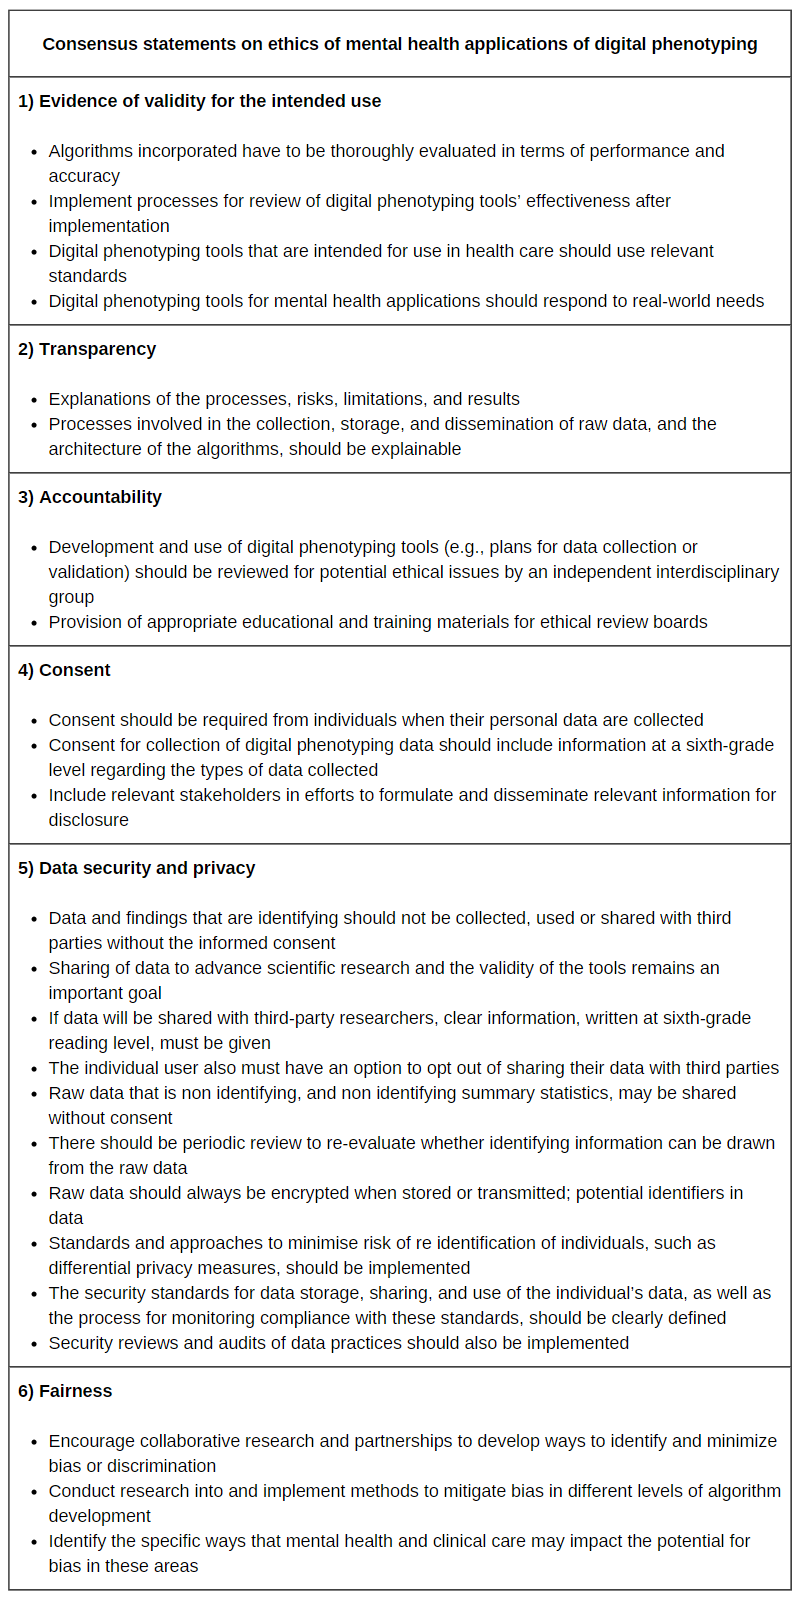 Consensus statements on ethics of mental health applications of digital phenotyping 1) Evidence of validity for the intended use ●Algorithms incorporated have to be thoroughly evaluated in terms of performance and accuracy ● Implement processes for review of digital phenotyping tools’ effectiveness after implementation ● Digital phenotyping tools that are intended for use in health care should use relevant standards ● Digital phenotyping tools for mental health applications should respond to real-world needs 2) Transparency ● Explanations of the processes, risks, limitations, and results ● Processes involved in the collection, storage, and dissemination of raw data, and the architecture of the algorithms, should be explainable 3) Accountability ● Development and use of digital phenotyping tools (e.g., plans for data collection or validation) should be reviewed for potential ethical issues by an independent interdisciplinary group ● Provision of appropriate educational and training materials for ethical review boards 4) Consent ● Consent should be required from individuals when their personal data are collected ● Consent for collection of digital phenotyping data should include information at a sixth-grade level regarding the types of data collected ● Include relevant stakeholders in efforts to formulate and disseminate relevant information for disclosure 5) Data security and privacy ● Data and findings that are identifying should not be collected, used or shared with third parties without the informed consent ● Sharing of data to advance scientific research and the validity of the tools remains an important goal ● If data will be shared with third-party researchers, clear information, written at sixth-grade reading level, must be given ● The individual user also must have an option to opt out of sharing their data with third parties ● Raw data that is non identifying, and non identifying summary statistics, may be shared without consent ● There should be periodic review to re-evaluate whether identifying information can be drawn from the raw data ● Raw data should always be encrypted when stored or transmitted; potential identifiers in data ● Standards and approaches to minimise risk of re identification of individuals, such as differential privacy measures, should be implemented ● The security standards for data storage, sharing, and use of the individual’s data, as well as the process for monitoring compliance with these standards, should be clearly defined ● Security reviews and audits of data practices should also be implemented 6) Fairness ● Encourage collaborative research and partnerships to develop ways to identify and minimize bias or discrimination ● Conduct research into and implement methods to mitigate bias in different levels of algorithm development ● Identify the specific ways that mental health and clinical care may impact the potential for bias in these areas